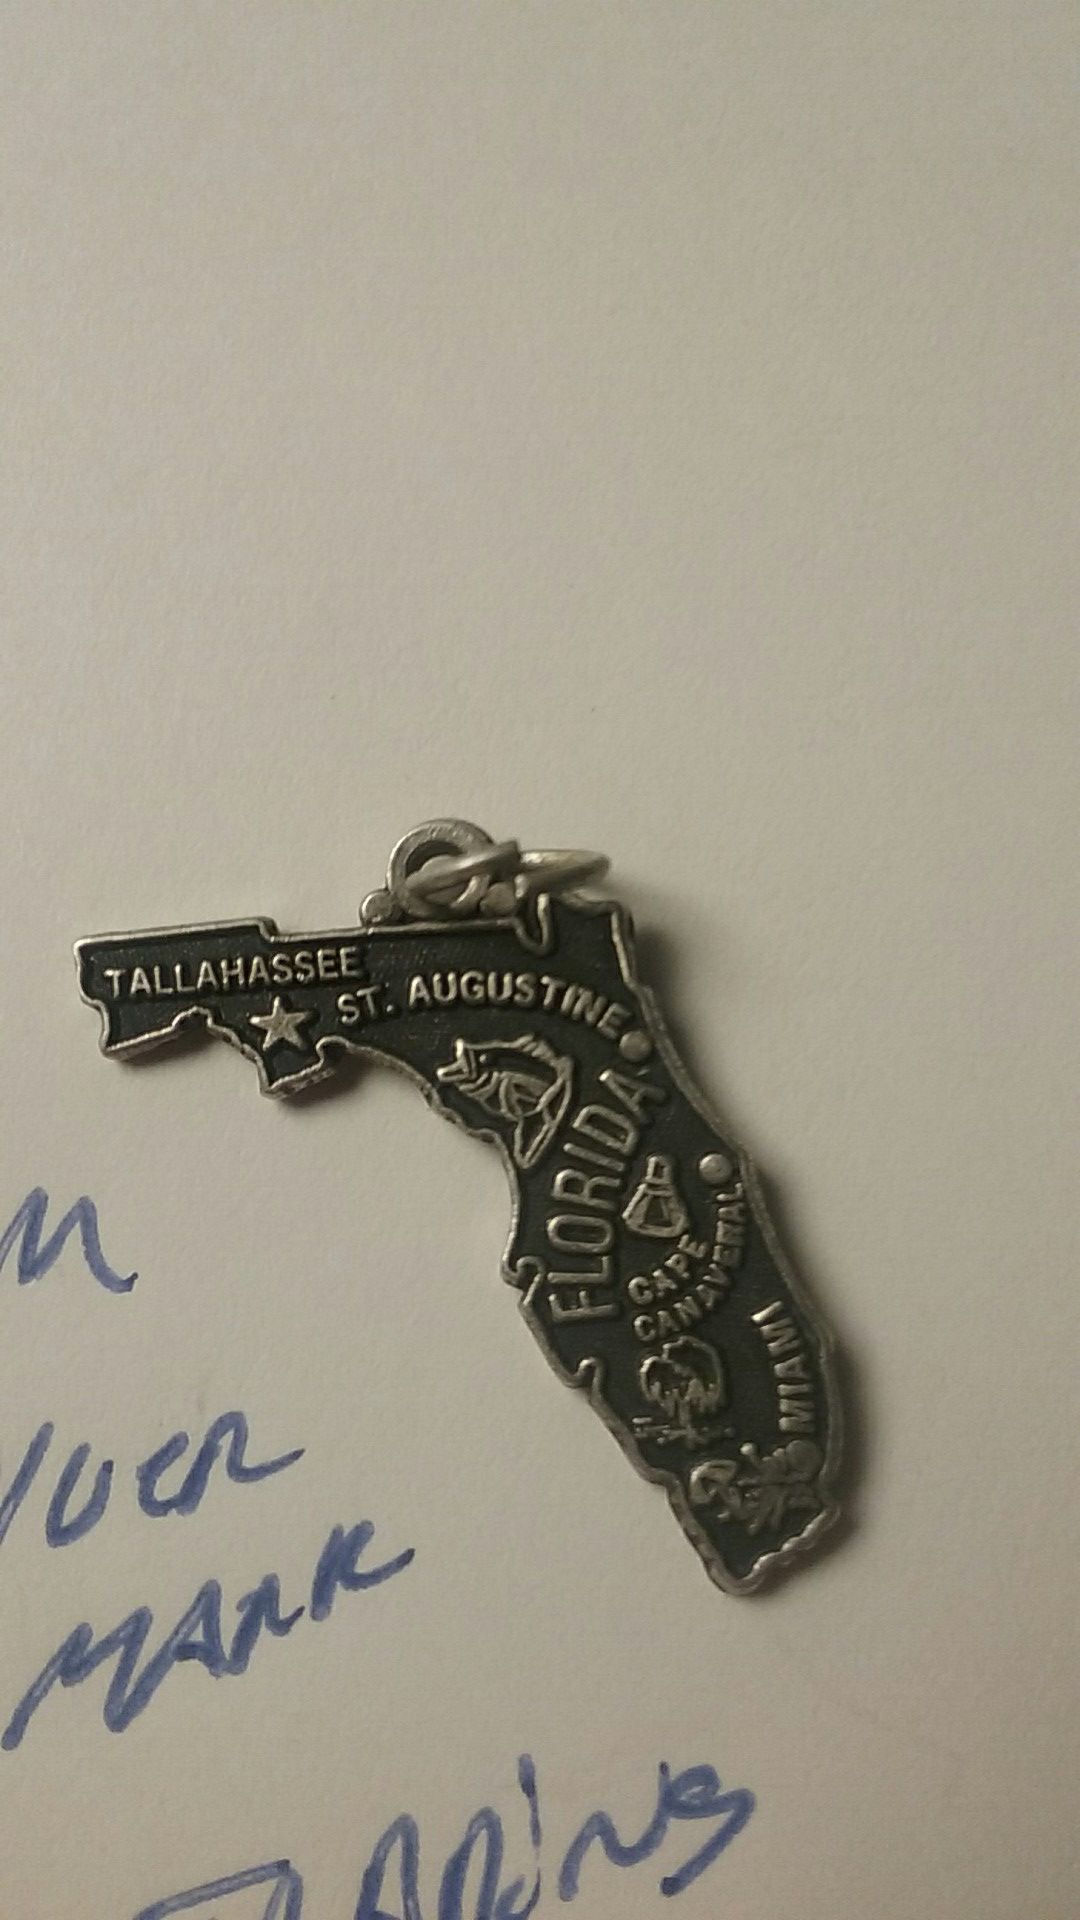 Vintage Sterling Silver Florida Charm from Maisrls Indian trading post 2